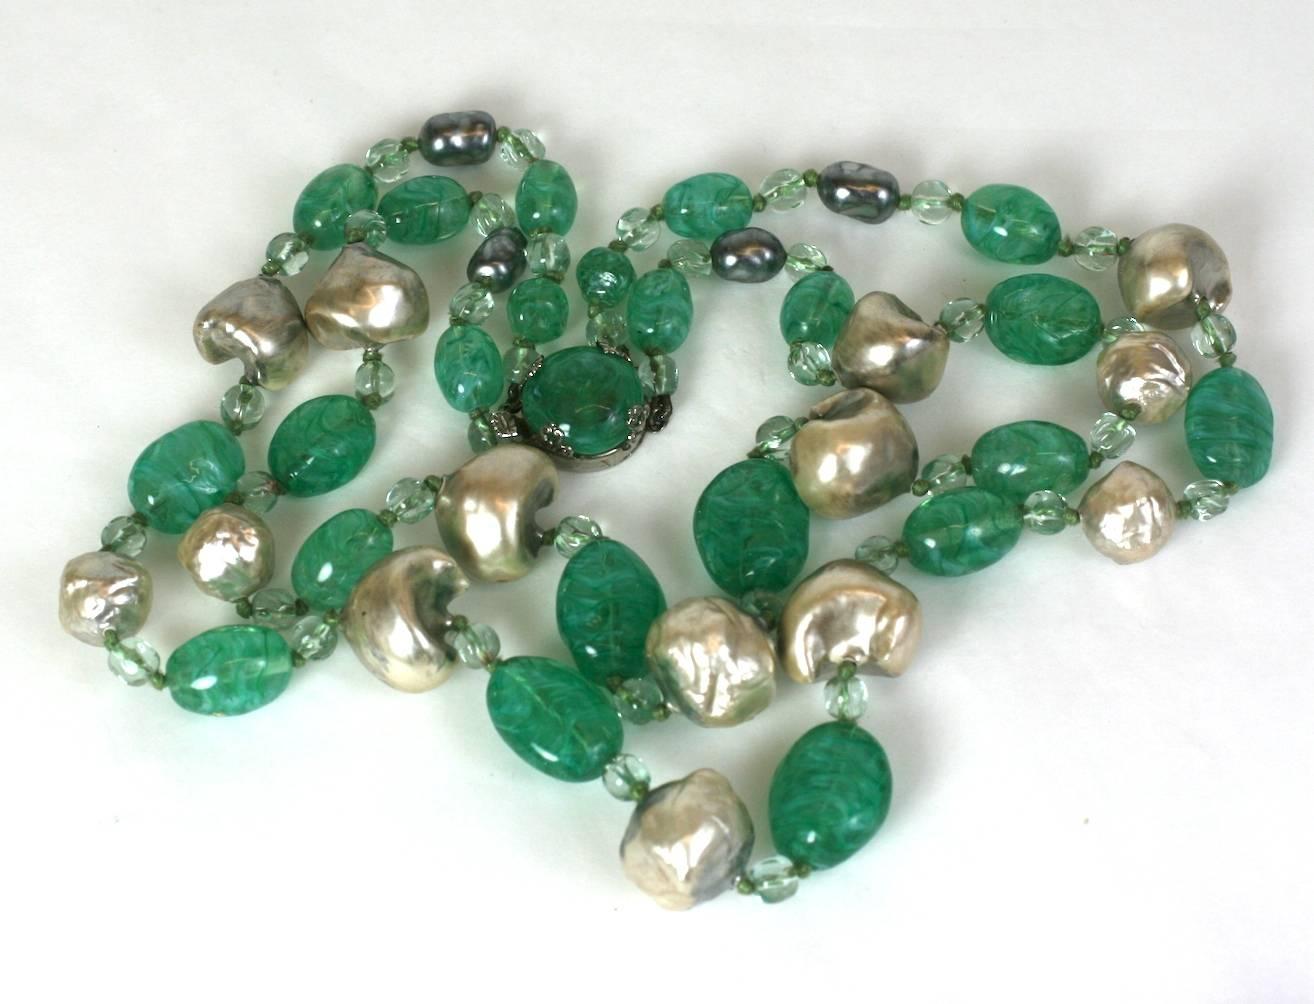 Elegant Louis Rousselet hand made naturalistic faux baroque grey pearl and faux pale emerald pate de verre double strand necklace. 1930's France. Lovely color combination. Unsigned.
Excellent Condition. 
L 21.50